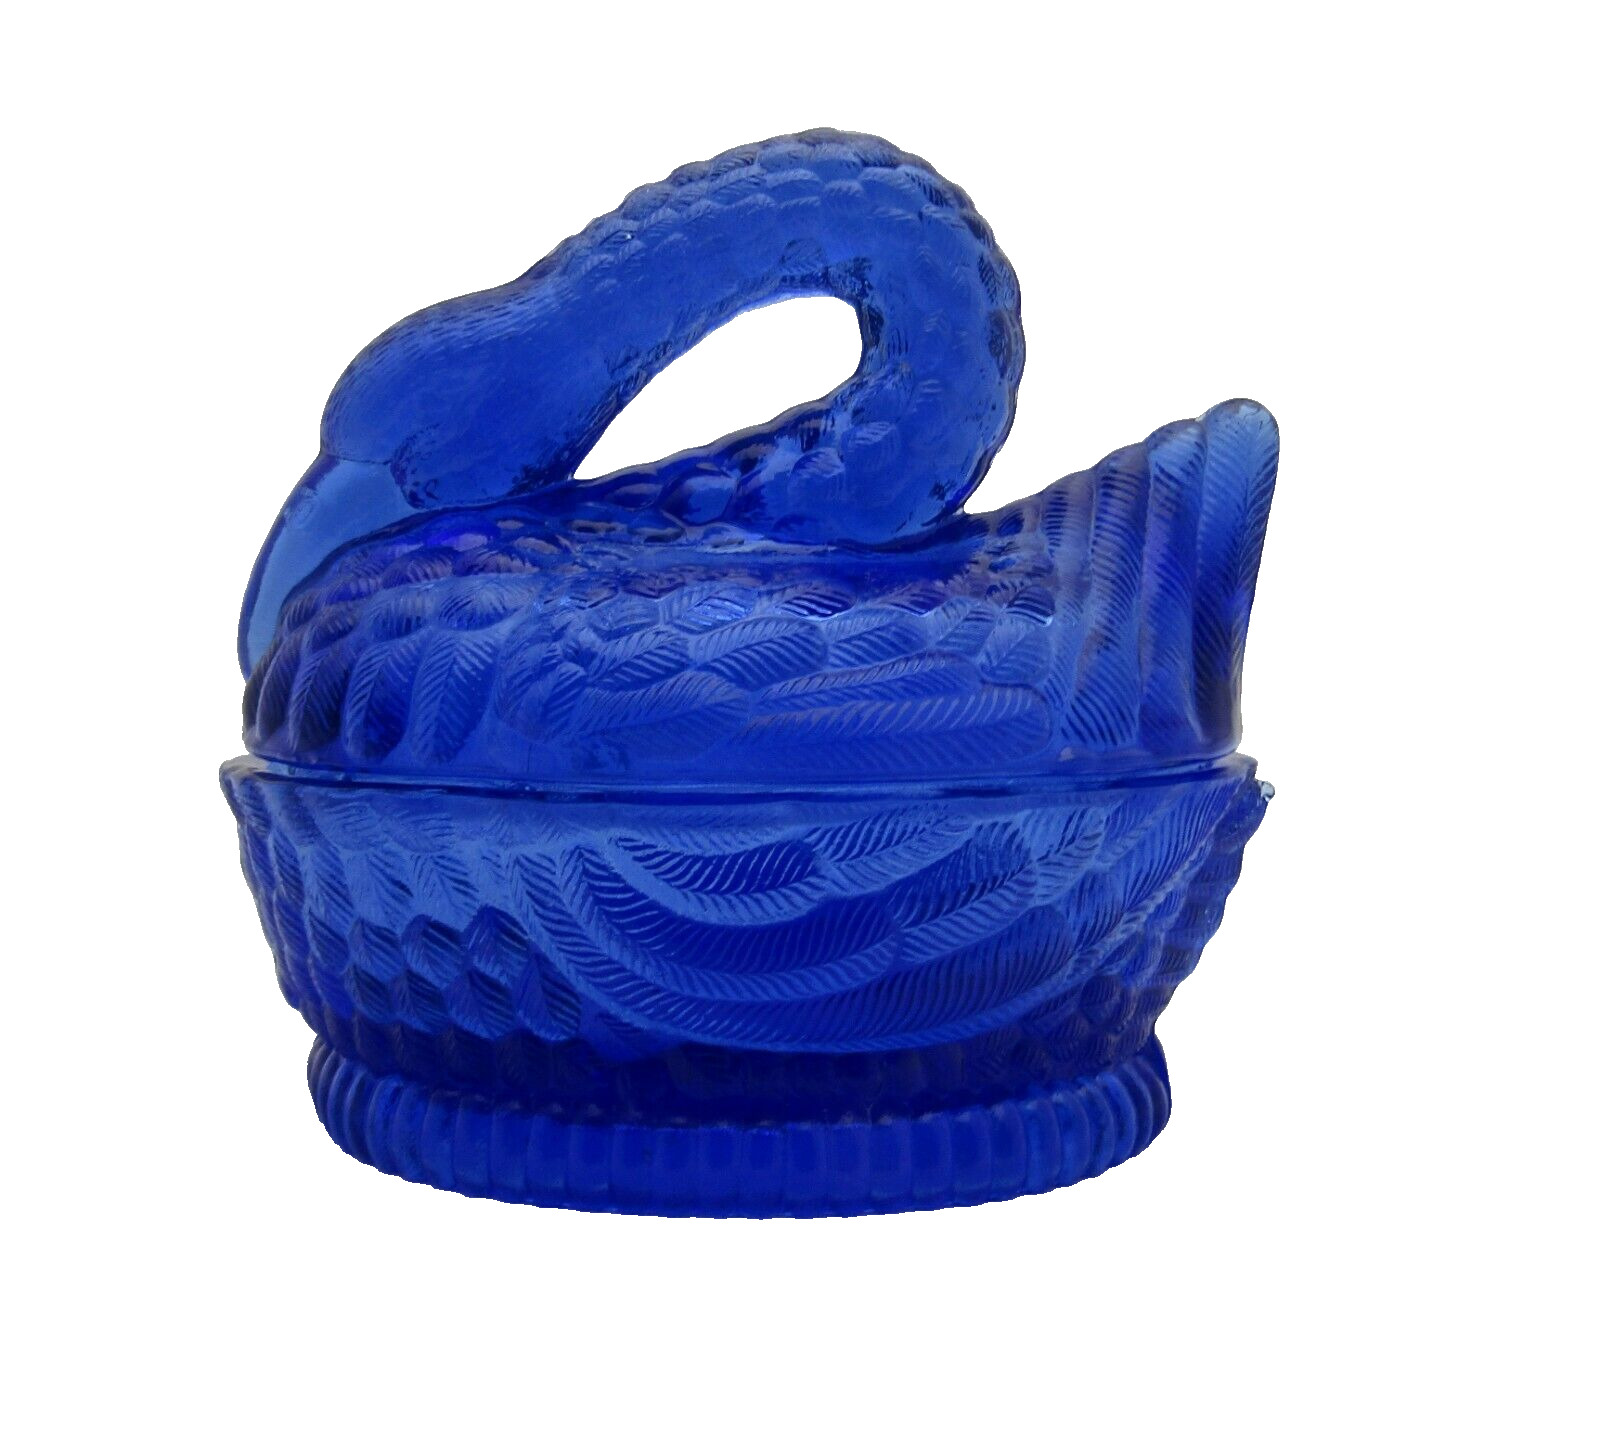 Hsinchu / AA IMPORTS Cobalt Blue Swan on a Nest Vintage Covered Dish